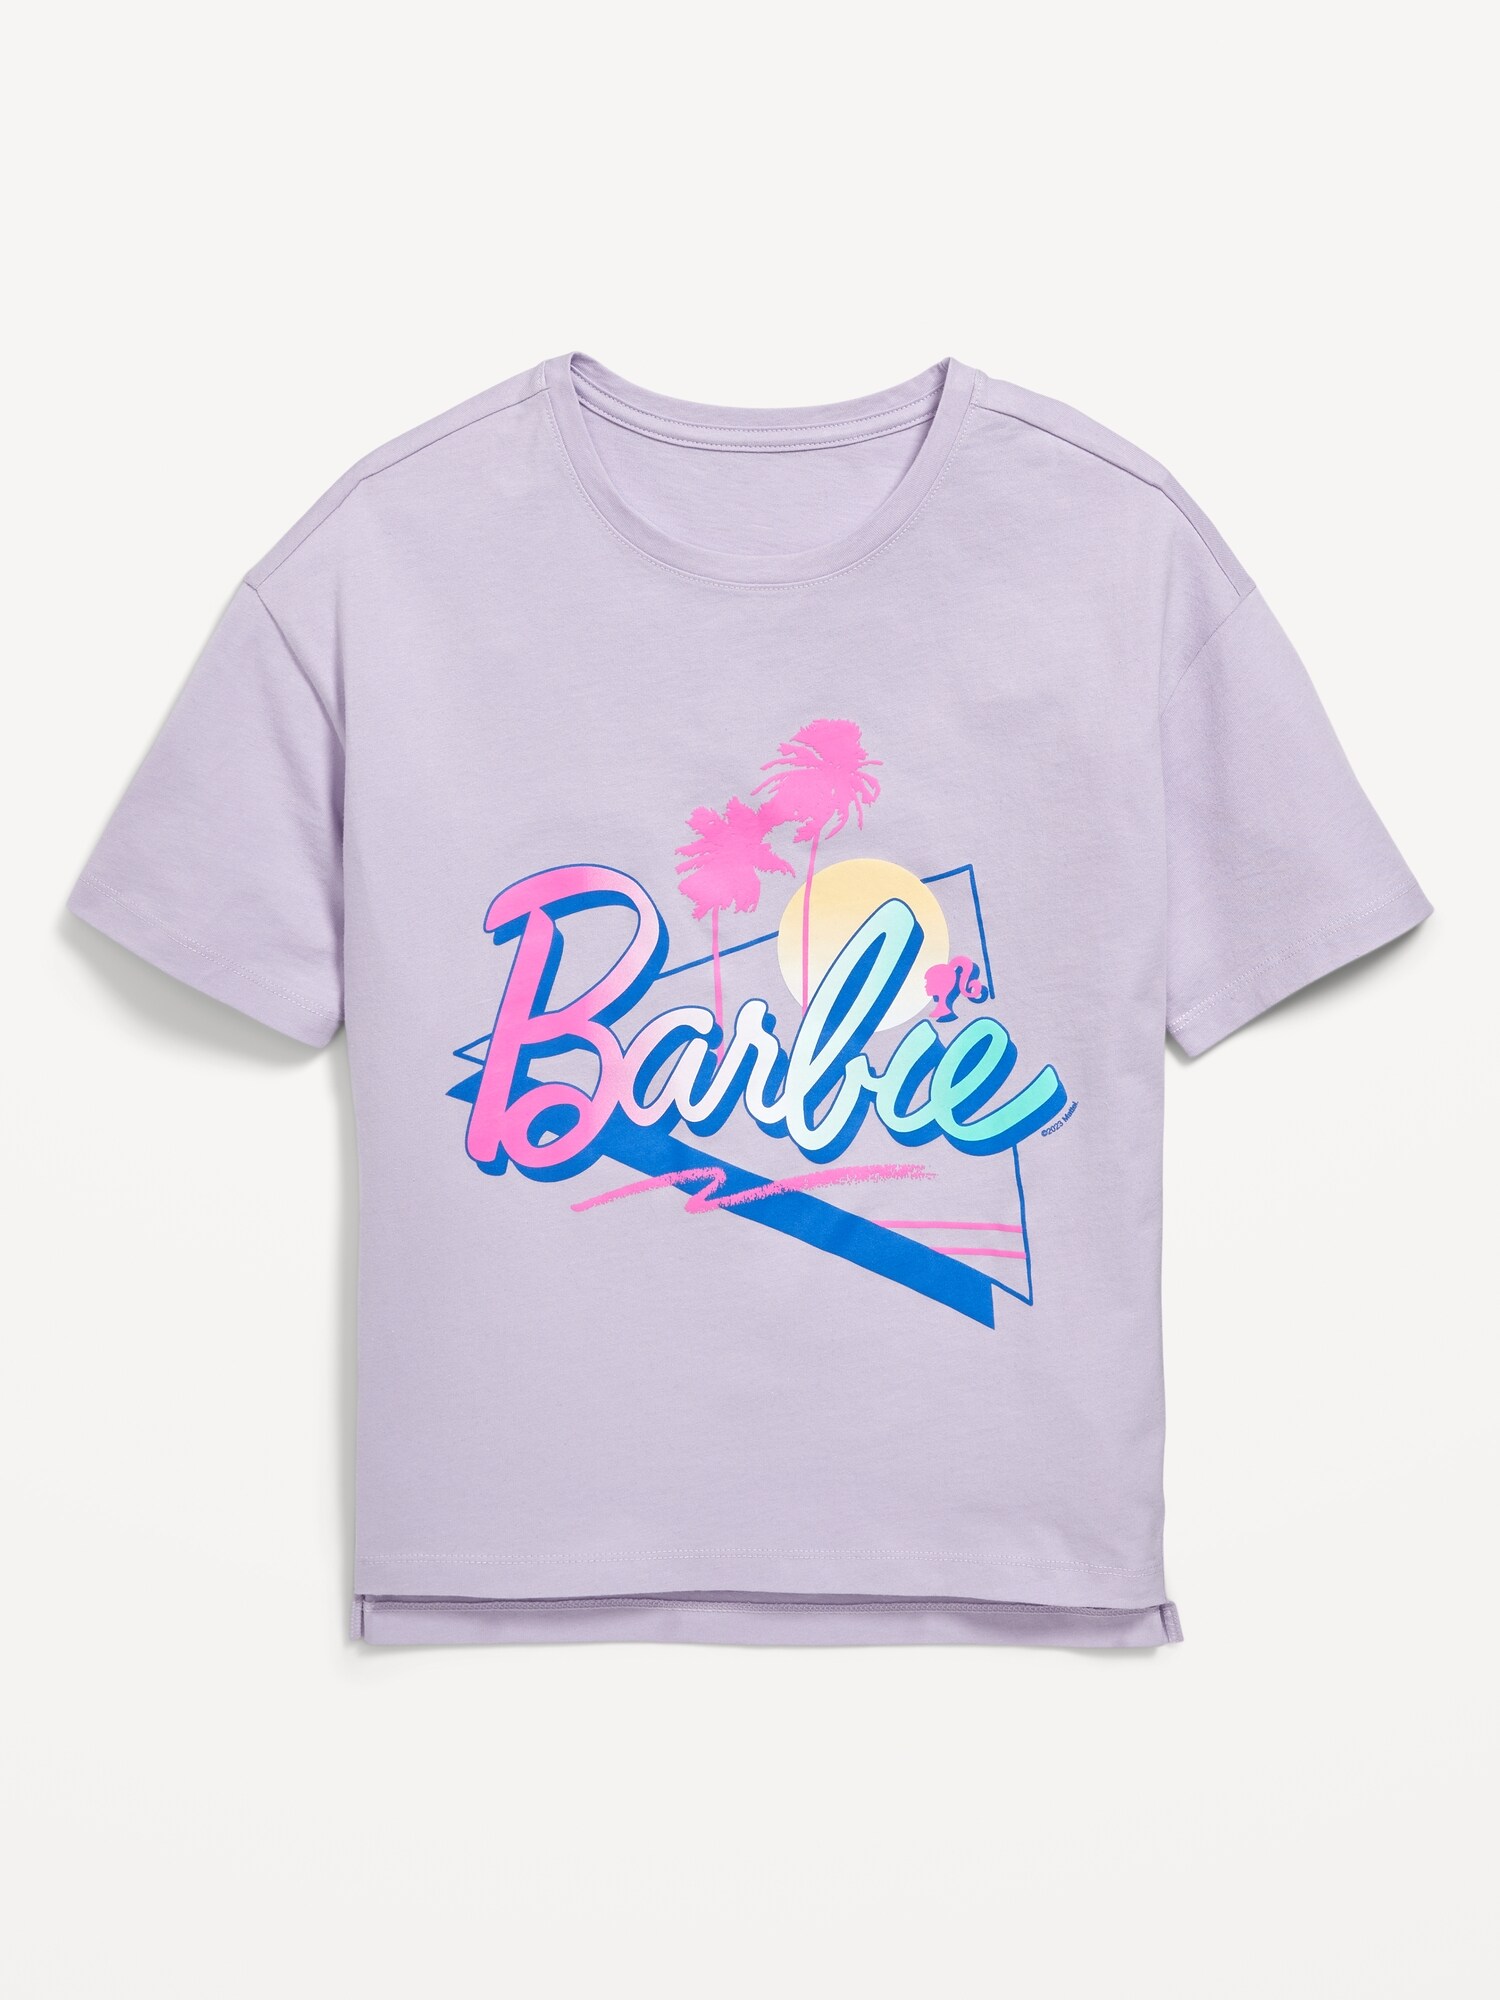 Official Old Navy Barbie Shirt